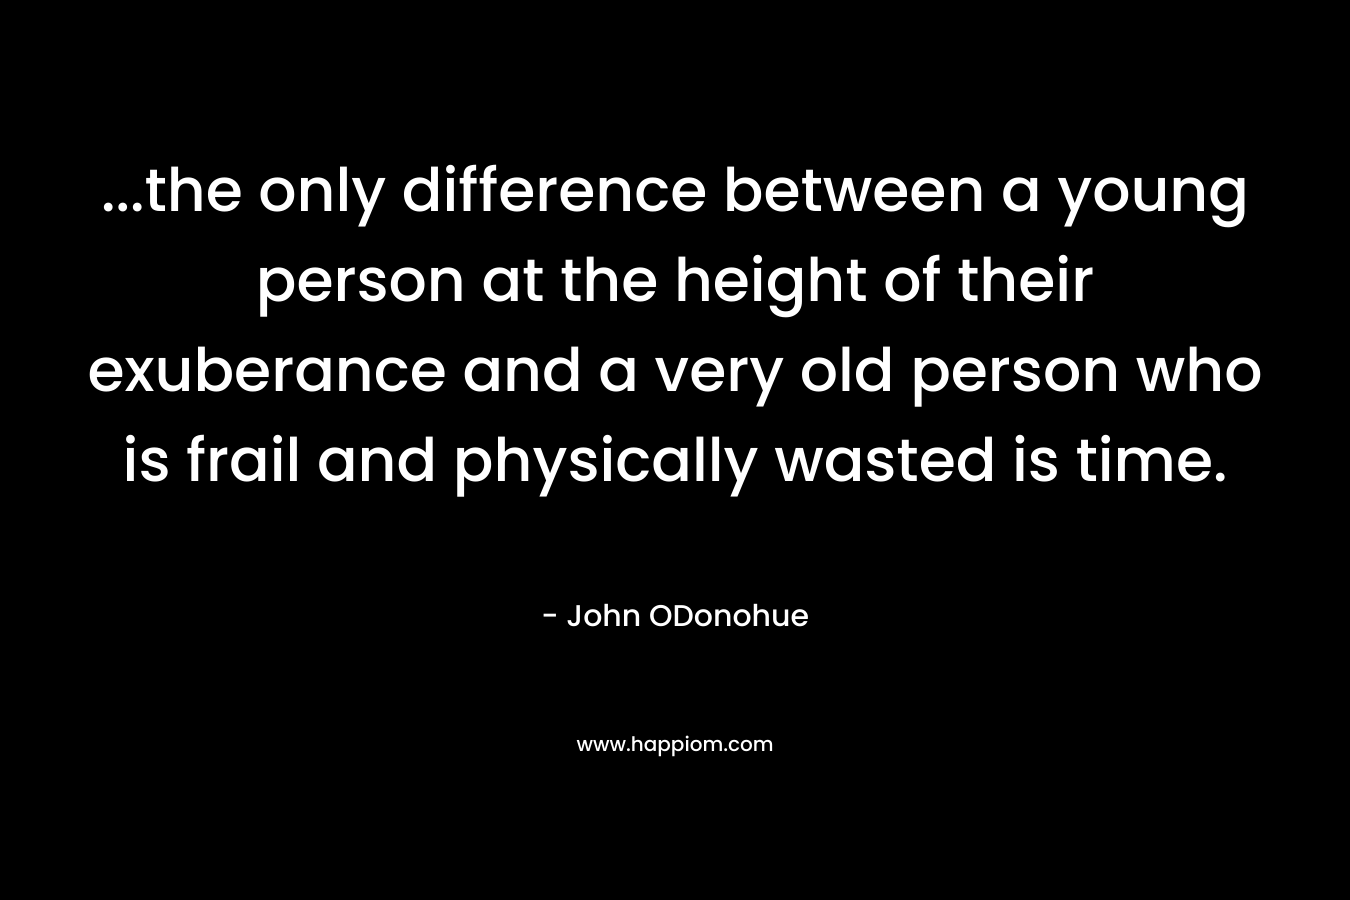 ...the only difference between a young person at the height of their exuberance and a very old person who is frail and physically wasted is time.